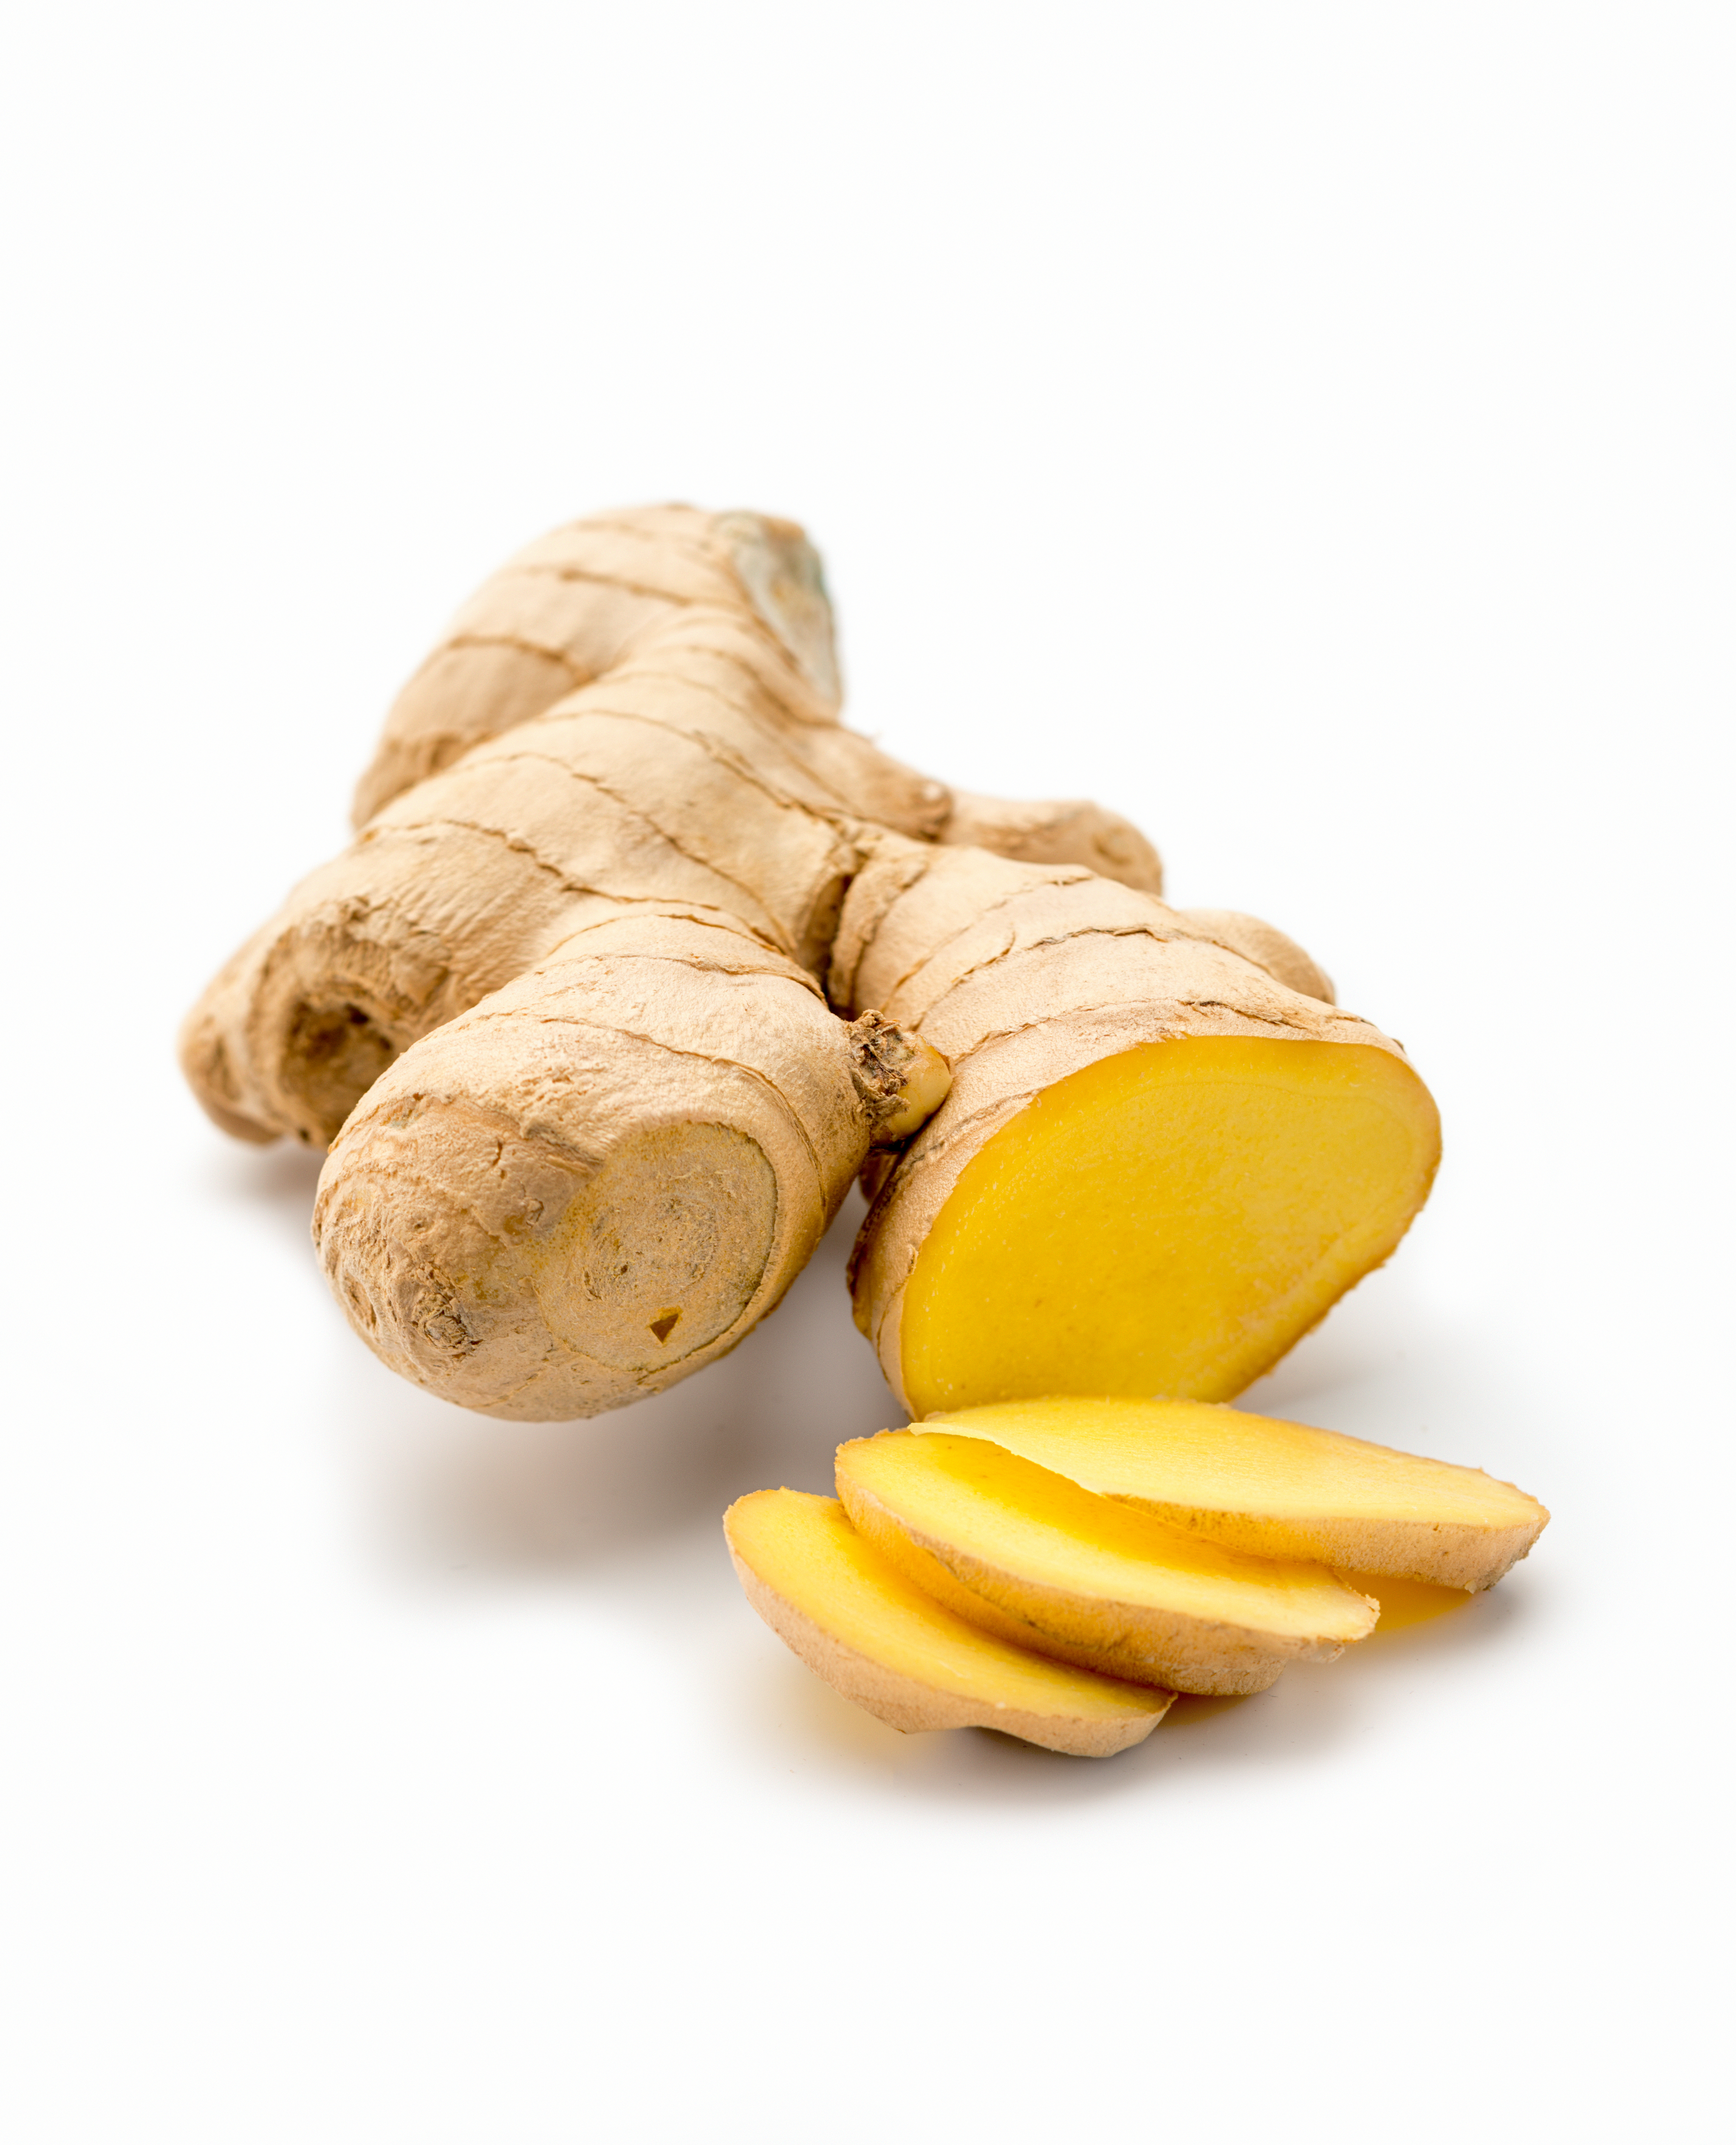 One study found ginger could also be useful in relieving headaches and migraines